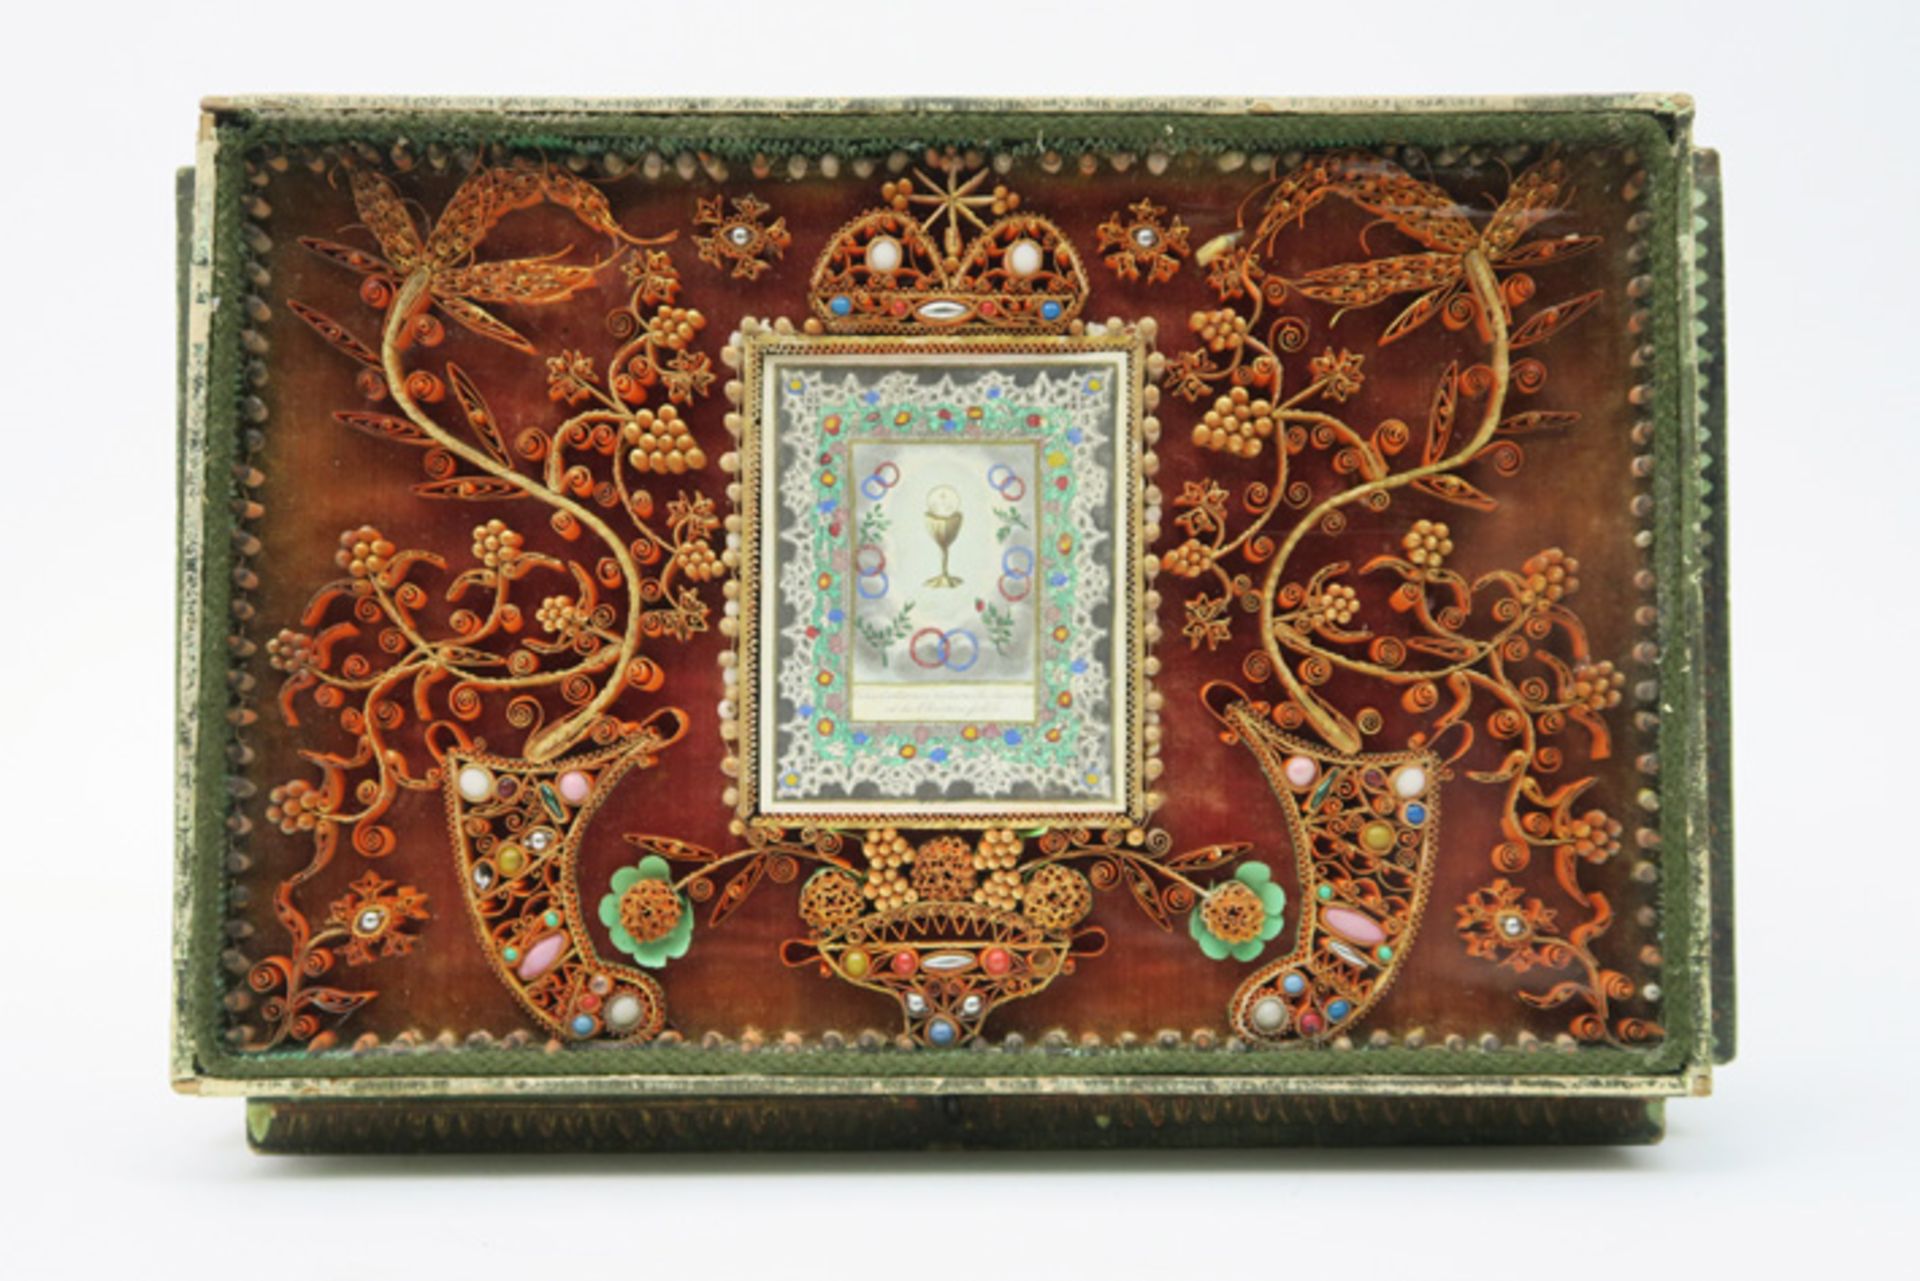 19th "Folk Art" box in painted wood and glass with relics VOLKSKUNST - 19° EEUW kistje in - Image 4 of 5